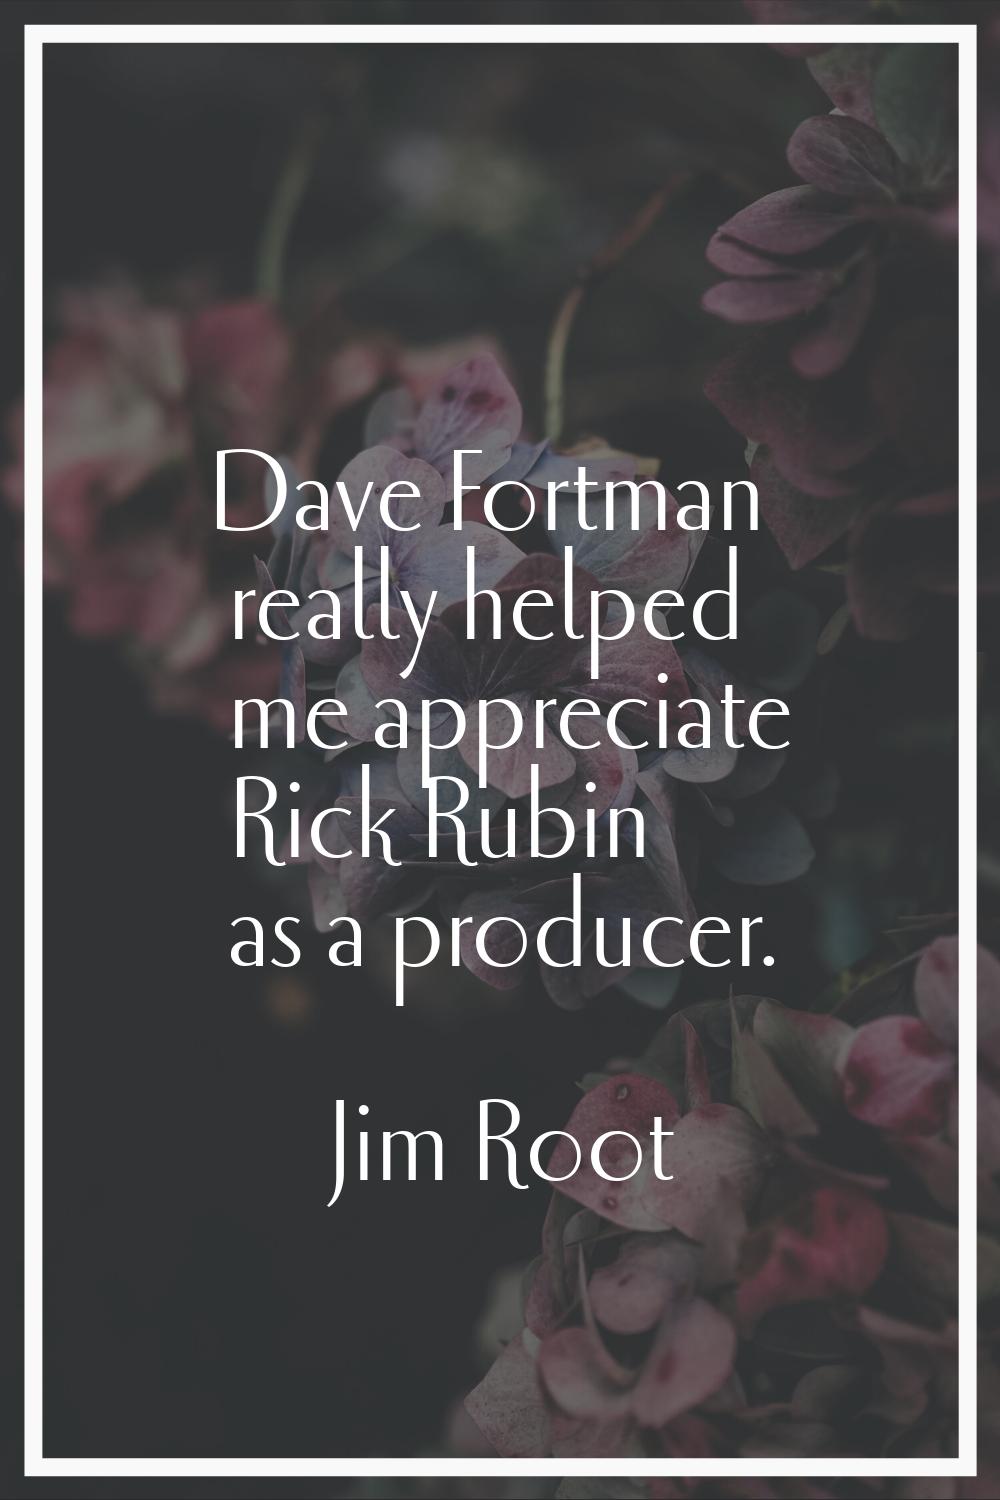 Dave Fortman really helped me appreciate Rick Rubin as a producer.